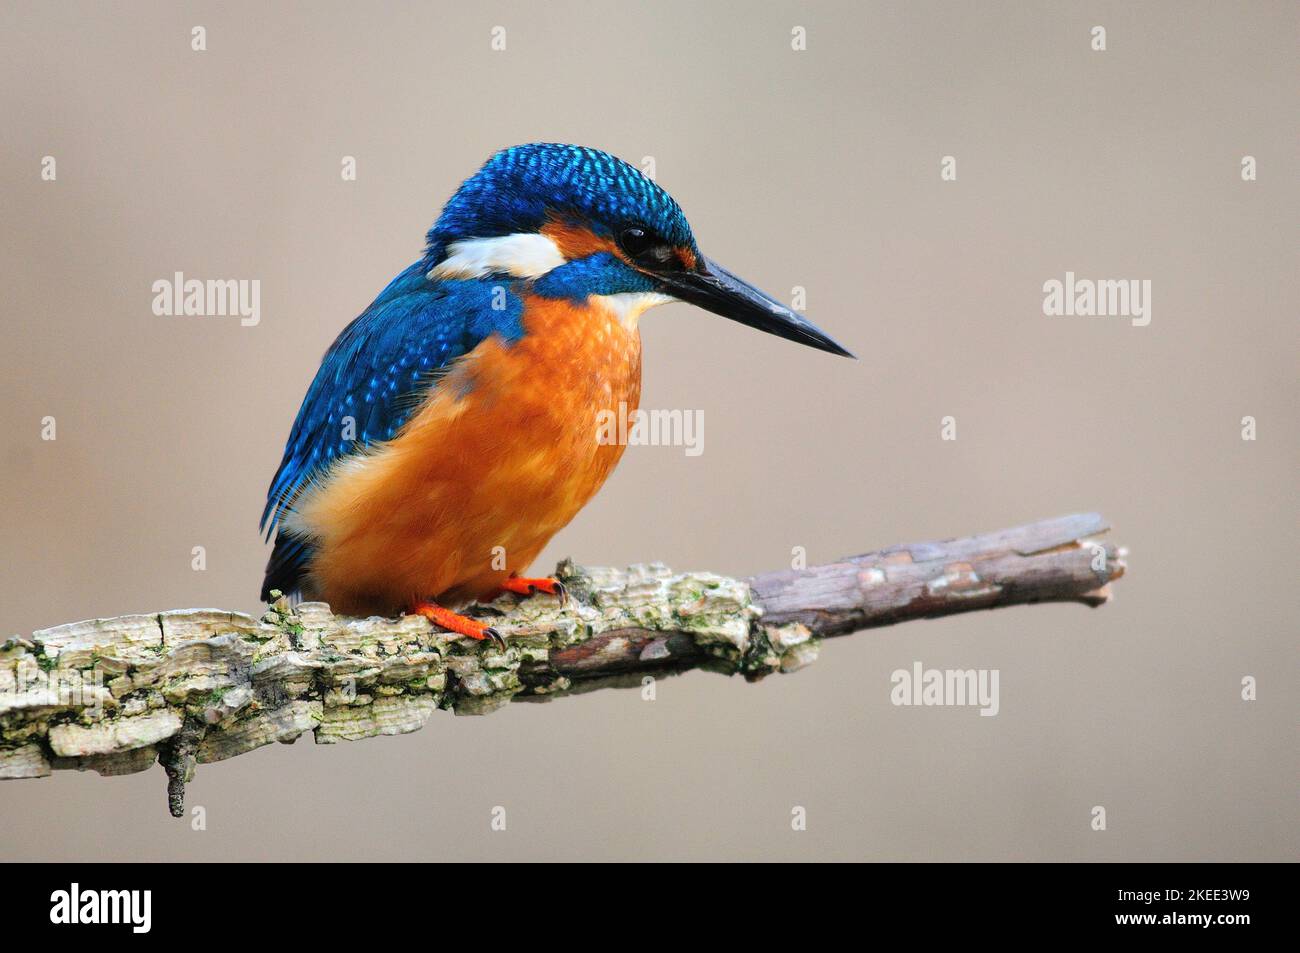 adult kingfisher alcedo atthis perched Stock Photo